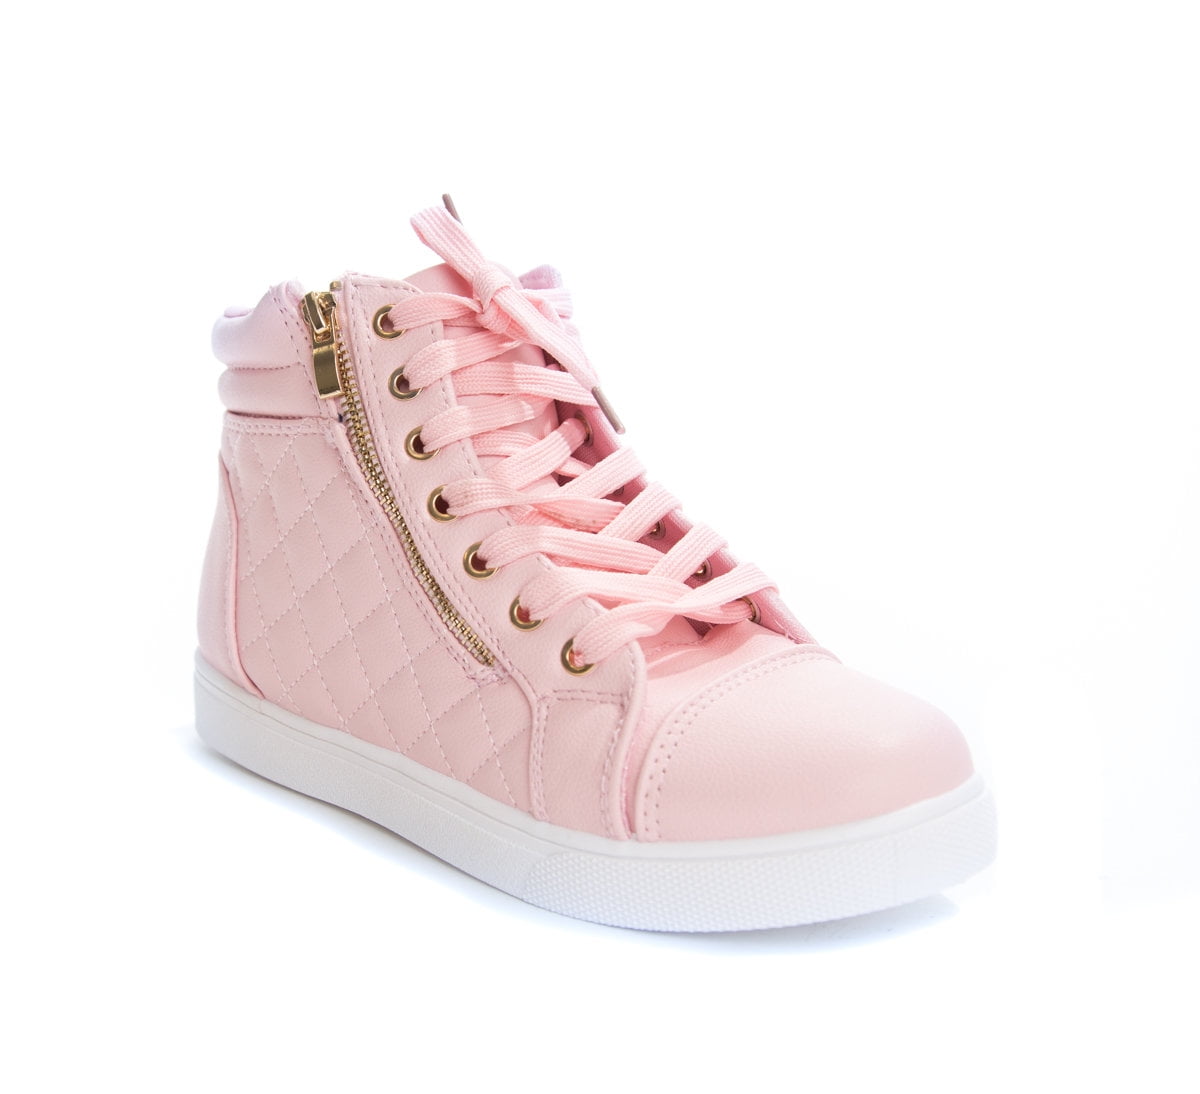 soho shoes women's leatherette quilted zipper lace up high top sneakers